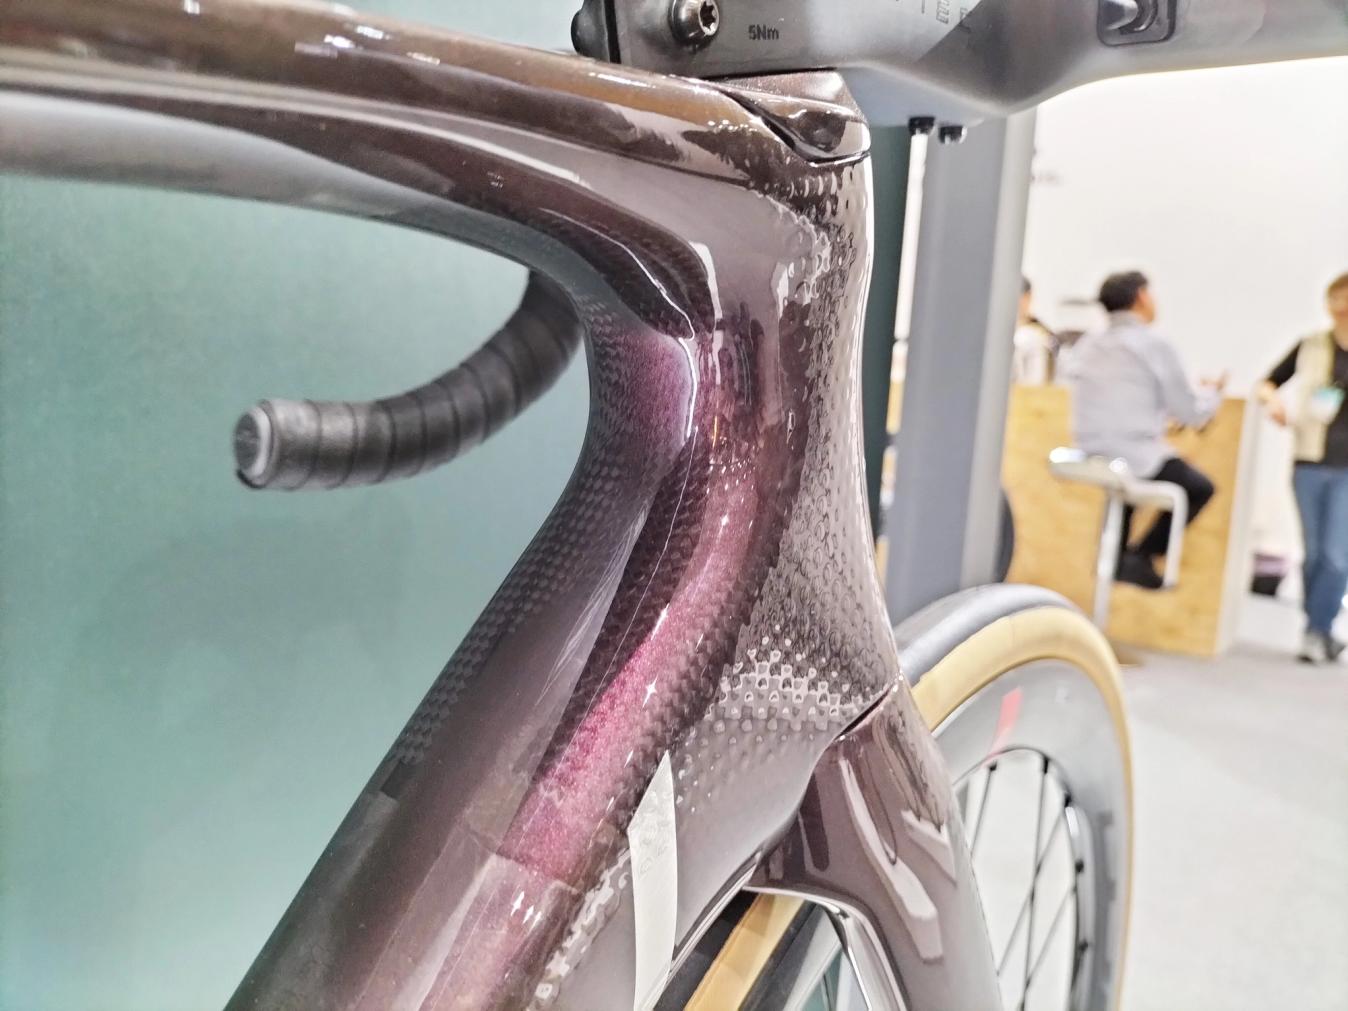 Beyond its climbing ability, the bike also has some unique aero features, like these dimples that can be found on the head and seat tubes. This is designed to mimic the texture of a golf ball and is called 'Vortex Tubing Technology'